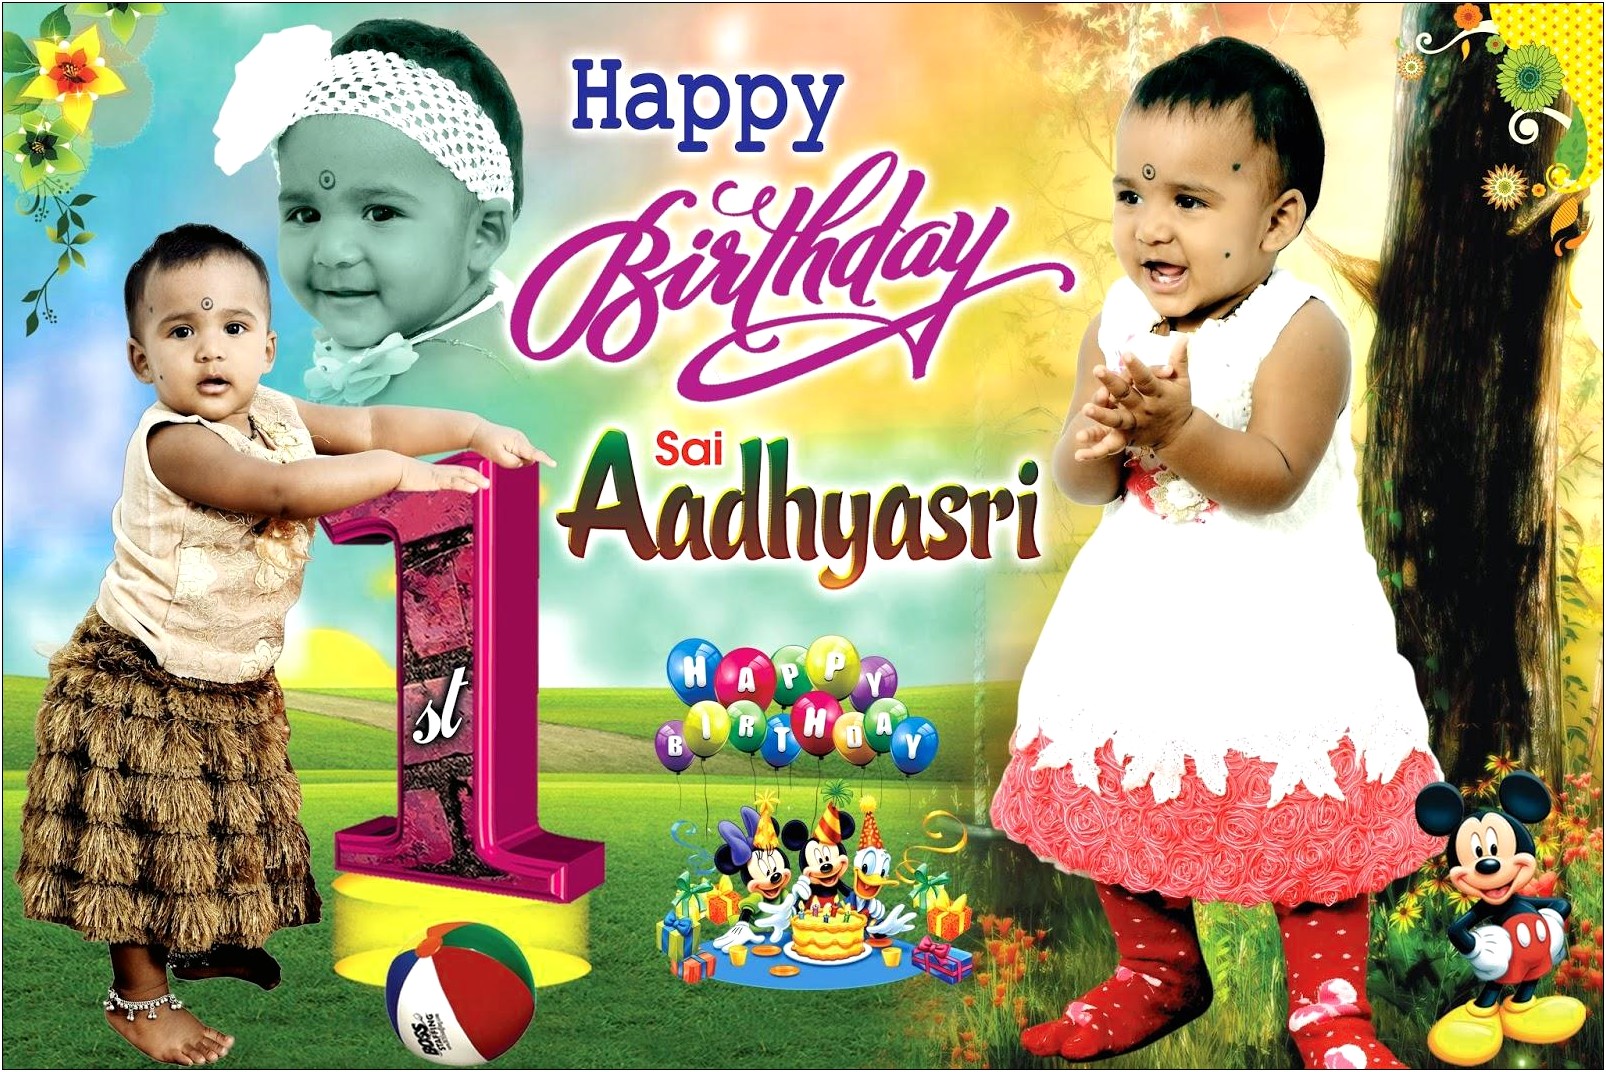 Birthday Banner Design Photoshop Template For Free